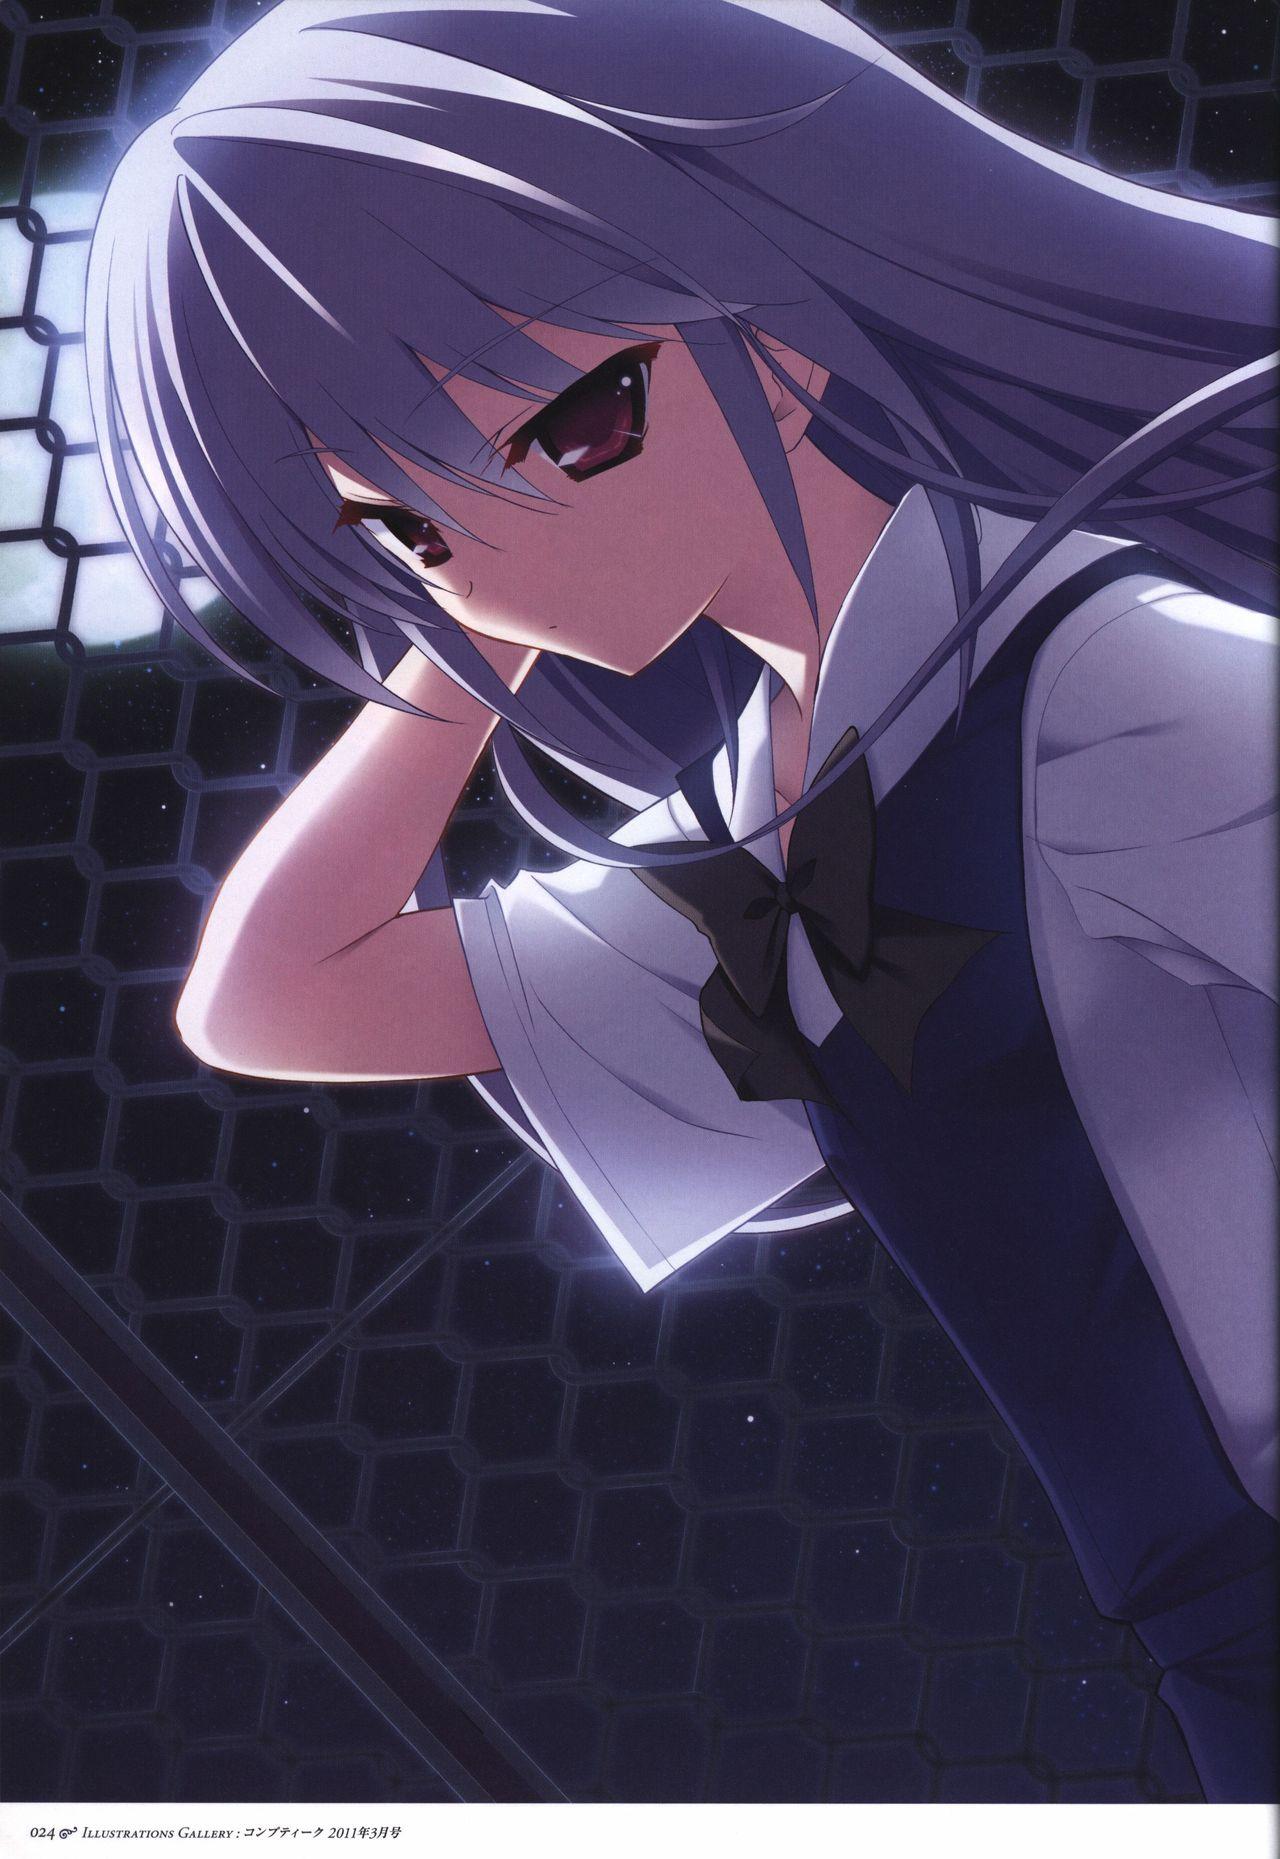 The Fruit of Grisaia Visual FanBook 24